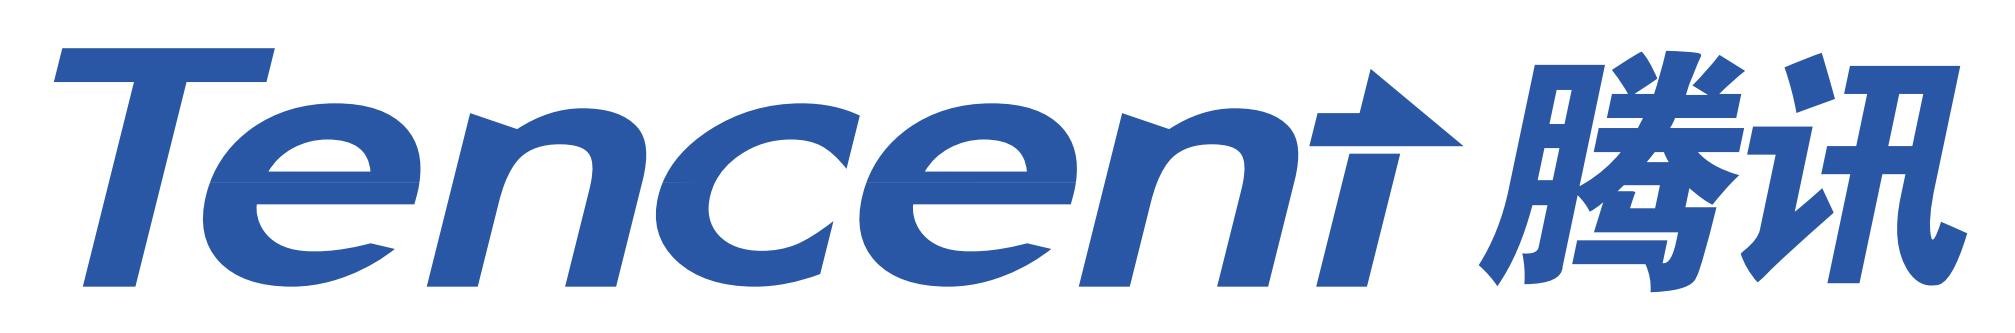 Tencent-Holdings-logo